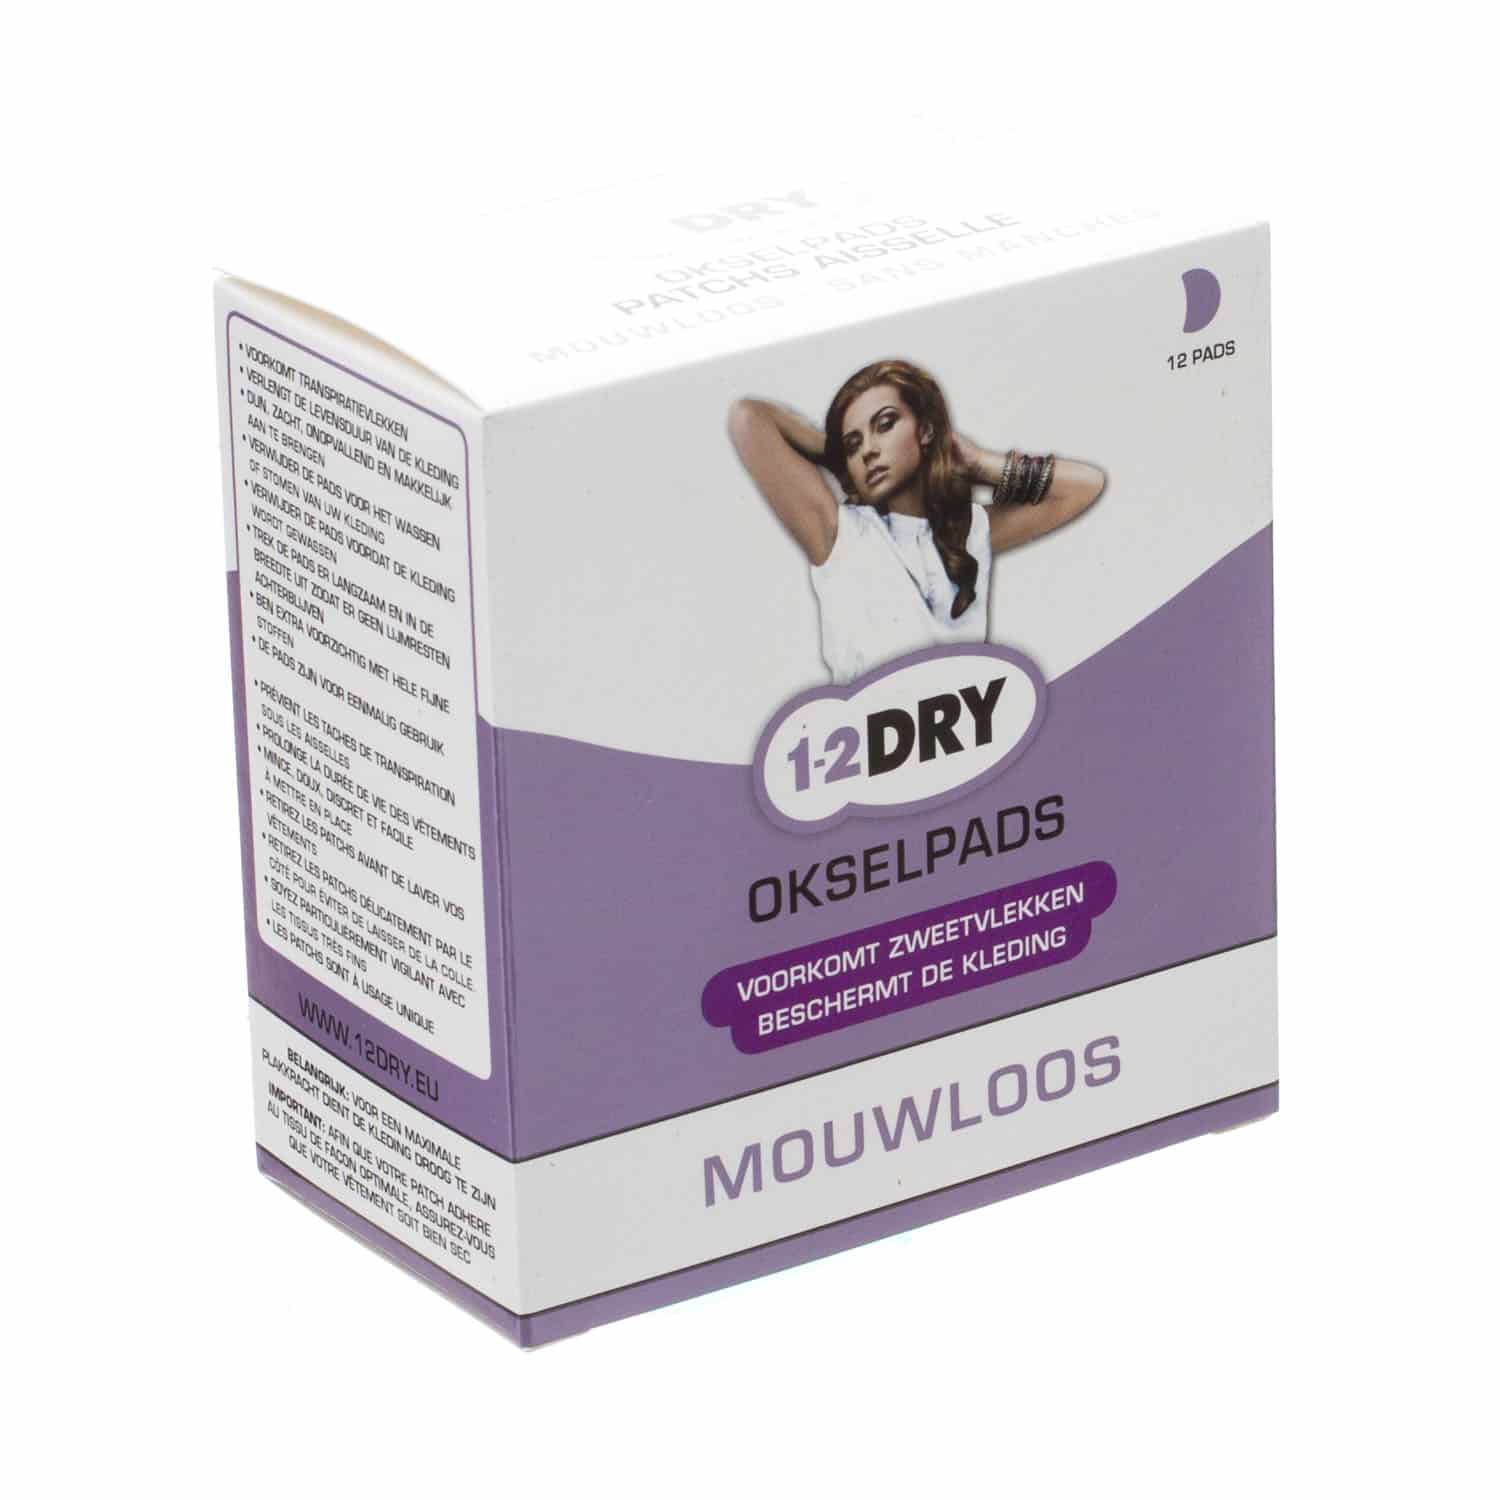 1-2 Dry Okselpads Mouwloos